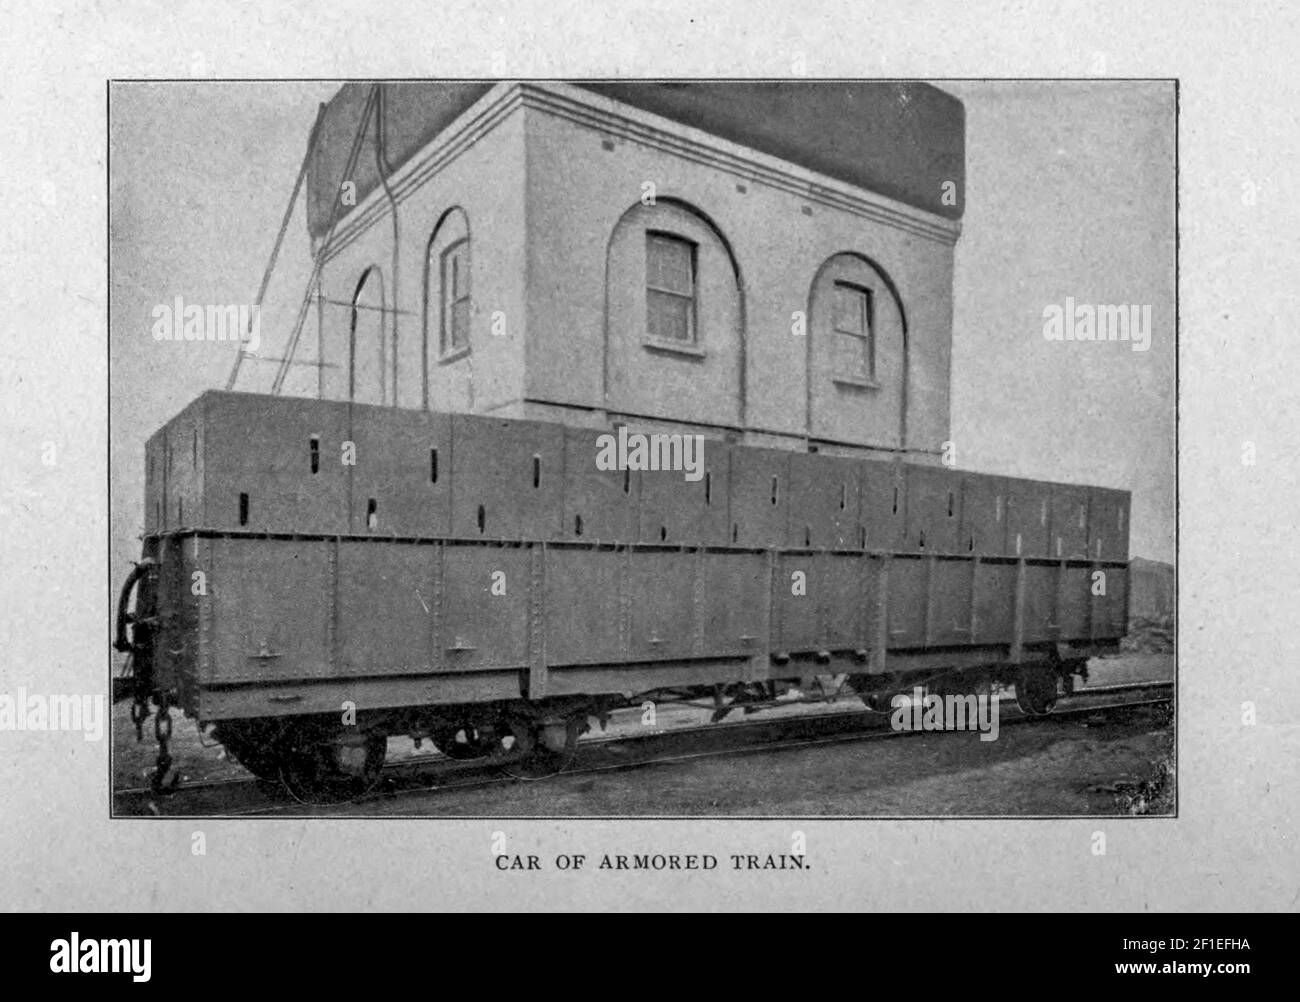 Car of Armored Train from the book ' Boer and Britisher in South Africa; a history of the Boer-British war and the wars for United South Africa, together with biographies of the great men who made the history of South Africa ' By Neville, John Ormond Published by Thompson & Thomas, Chicago, USA in 1900 Stock Photo